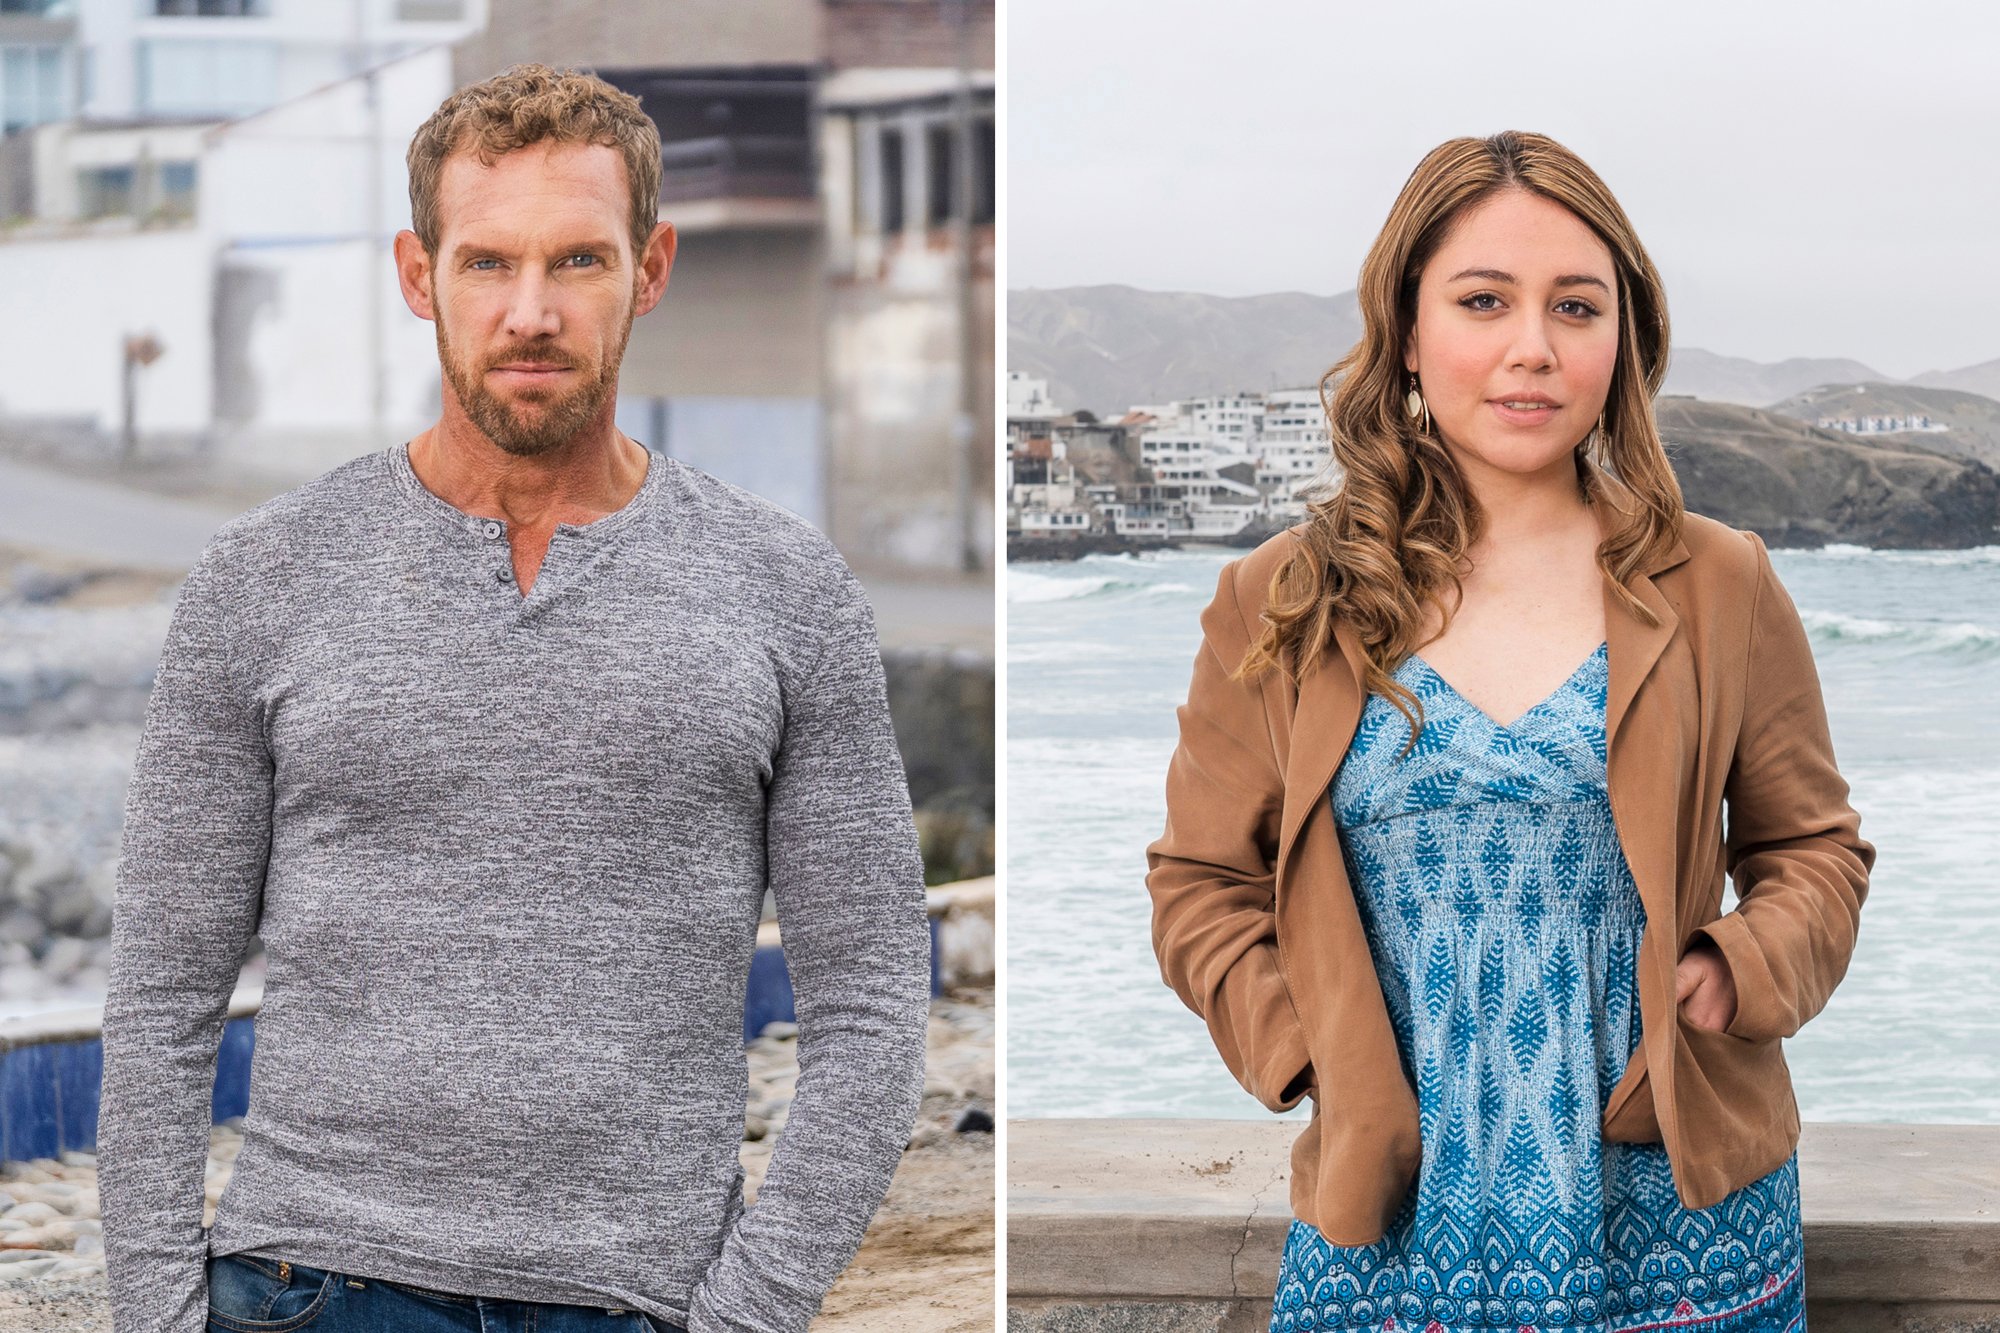 '90 Day Fiancé: Before the 90 Days' stars Ben, wearing a long sleeved gray shirt, and Mahogany, wearing a blue dress and tan jacket, in promotional images for the show.